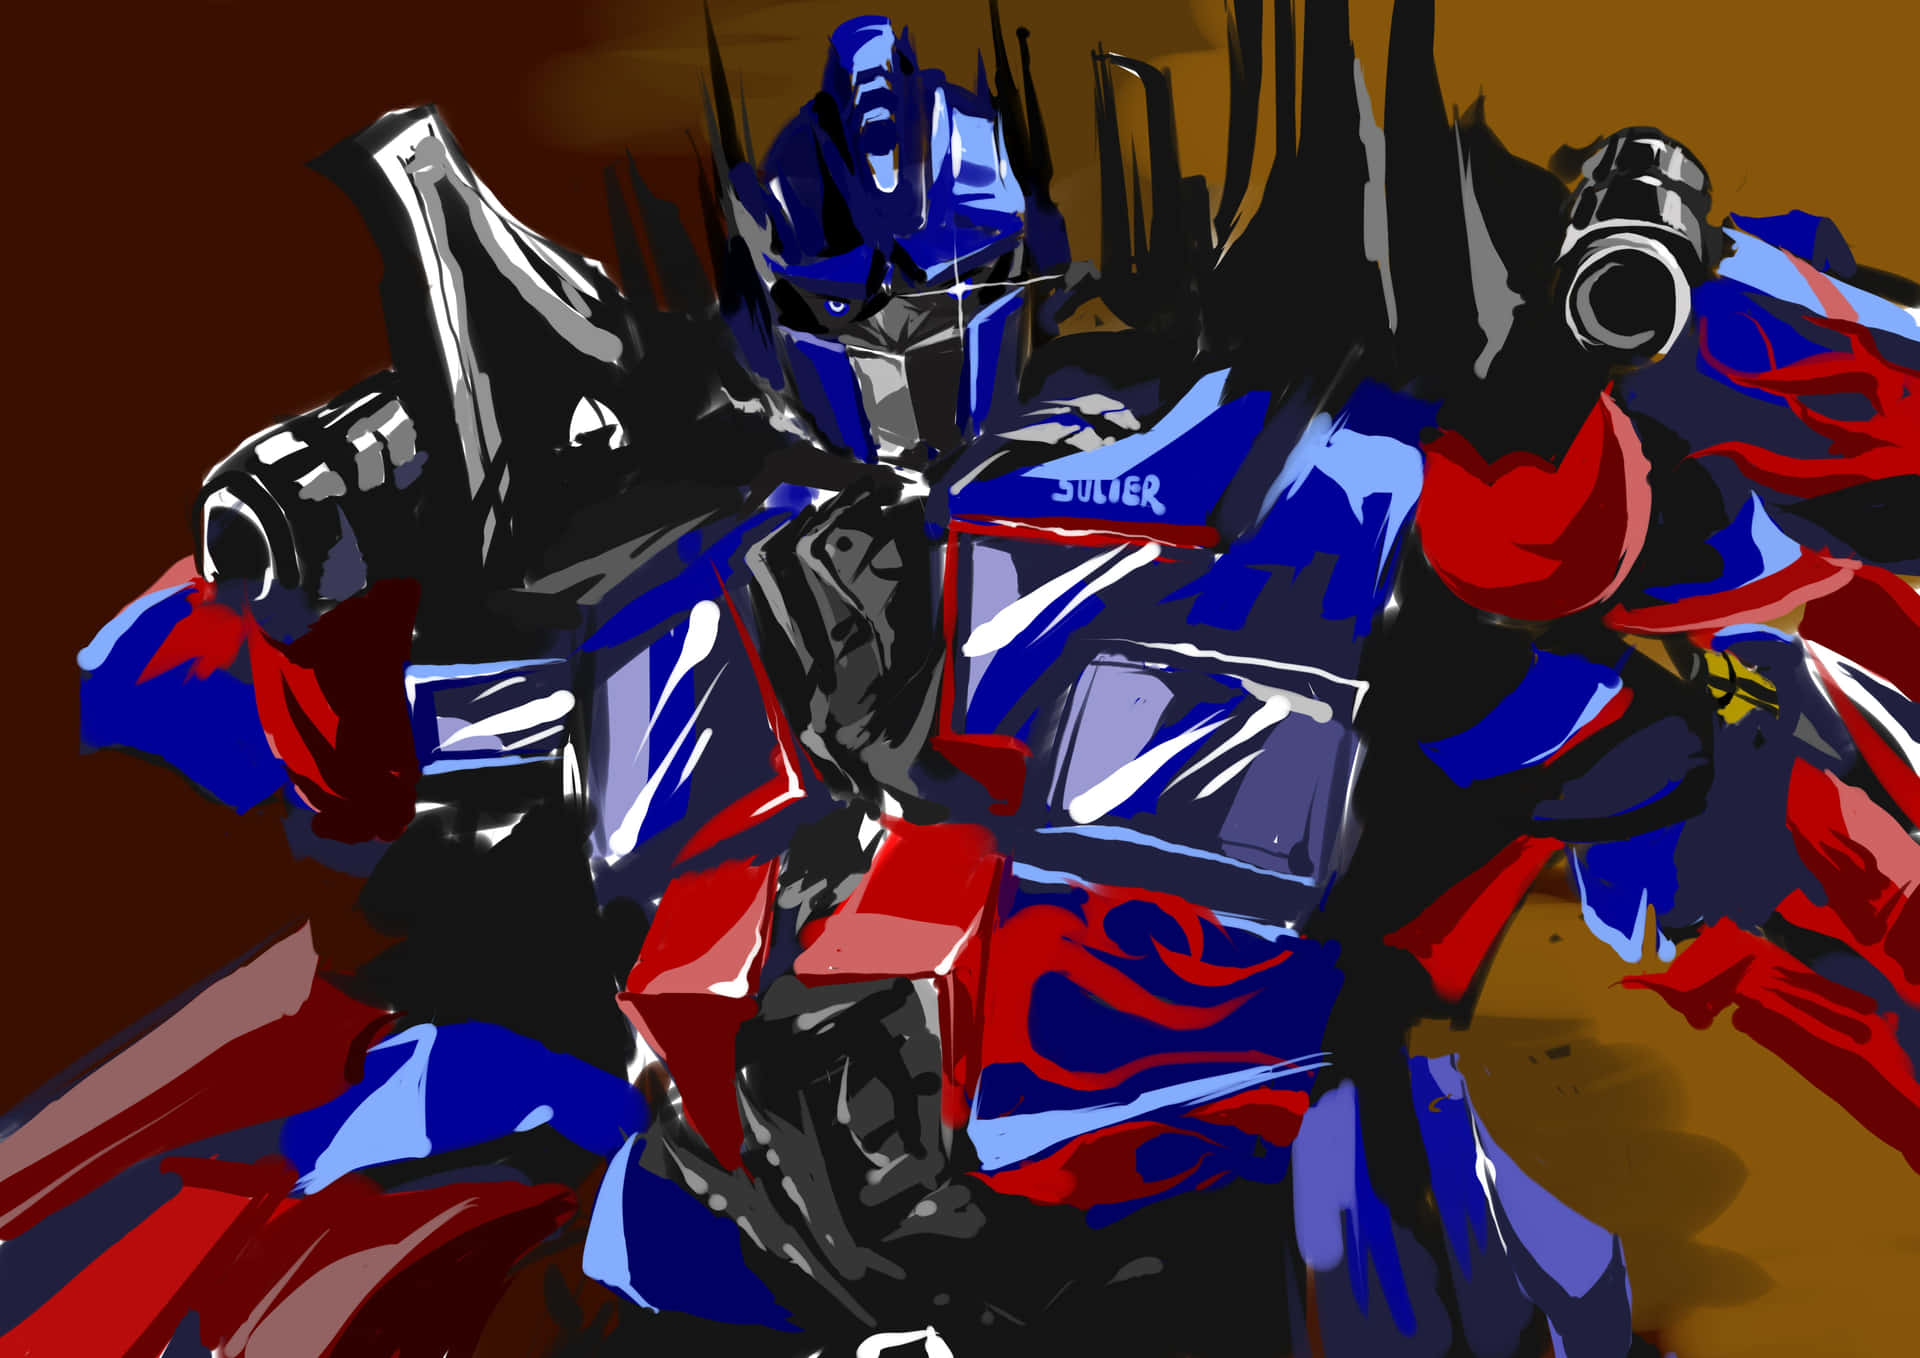 Get Ready for Action with Optimus Prime 4k Wallpaper